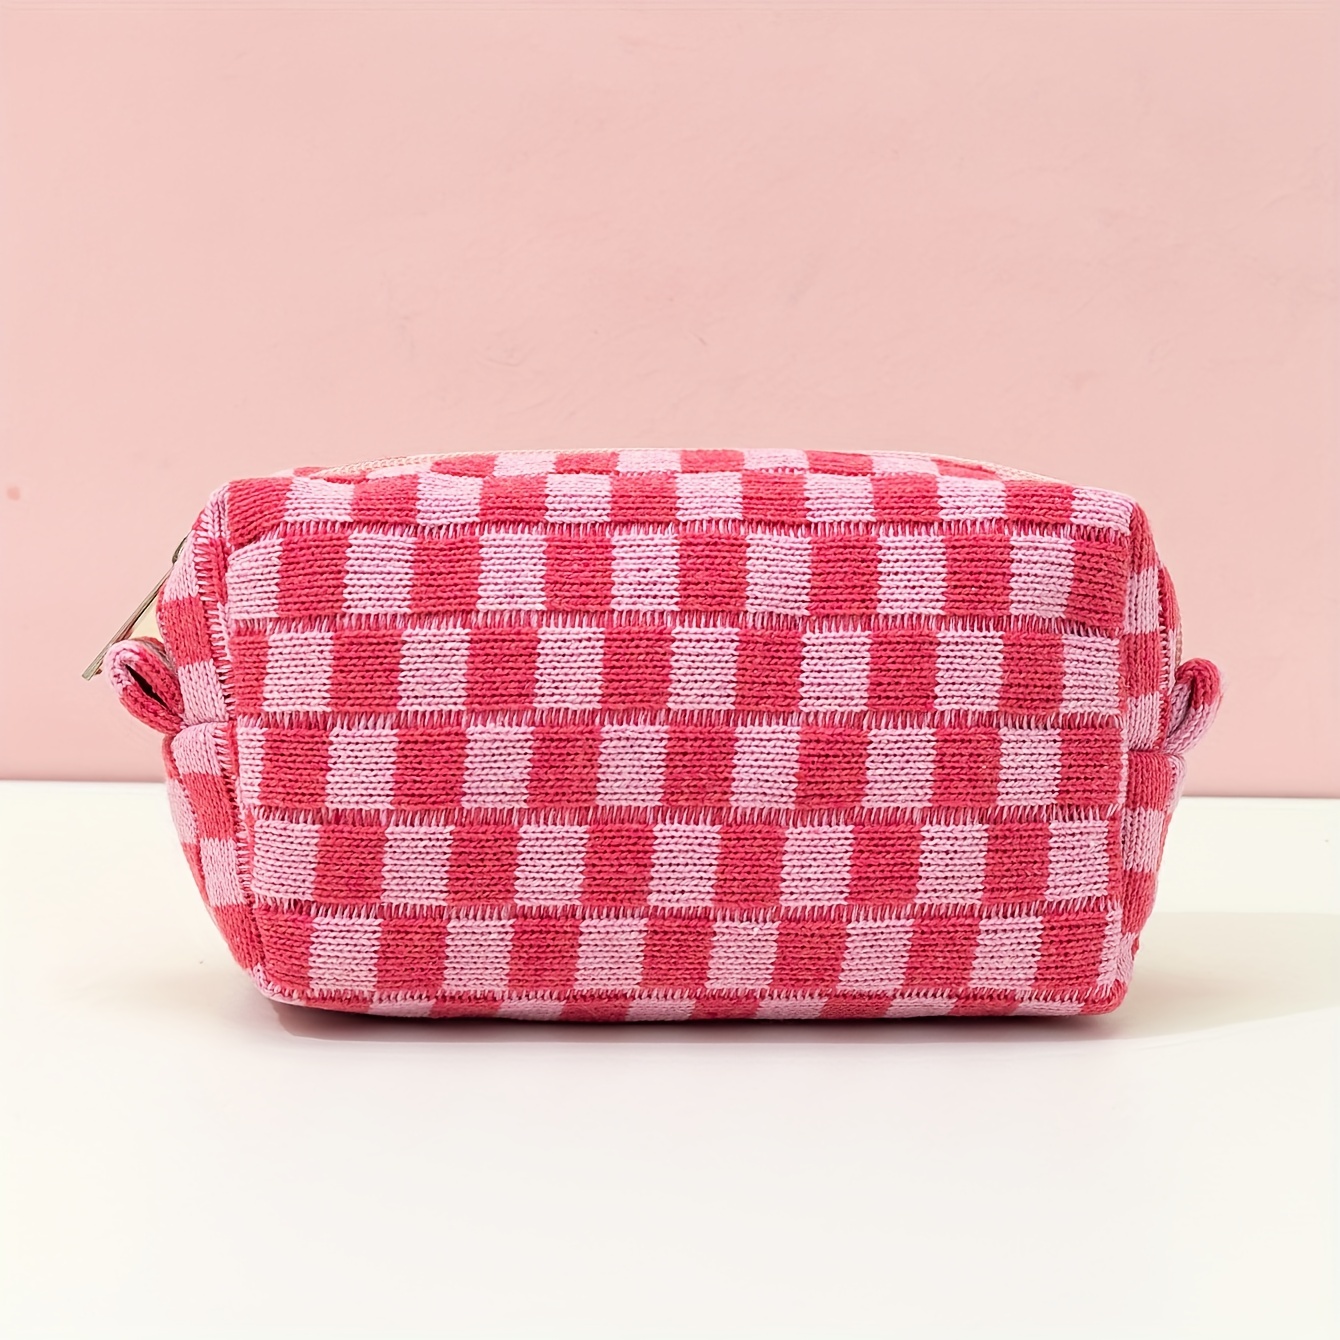  6 Pcs Preppy Makeup Bag Bulk Checkered Cosmetic Bag Pink  Makeup Pouch Personalize Travel Toiletry Bag Organizer Cute DIY Makeup  Brushes Storage Bag for Women : Beauty & Personal Care